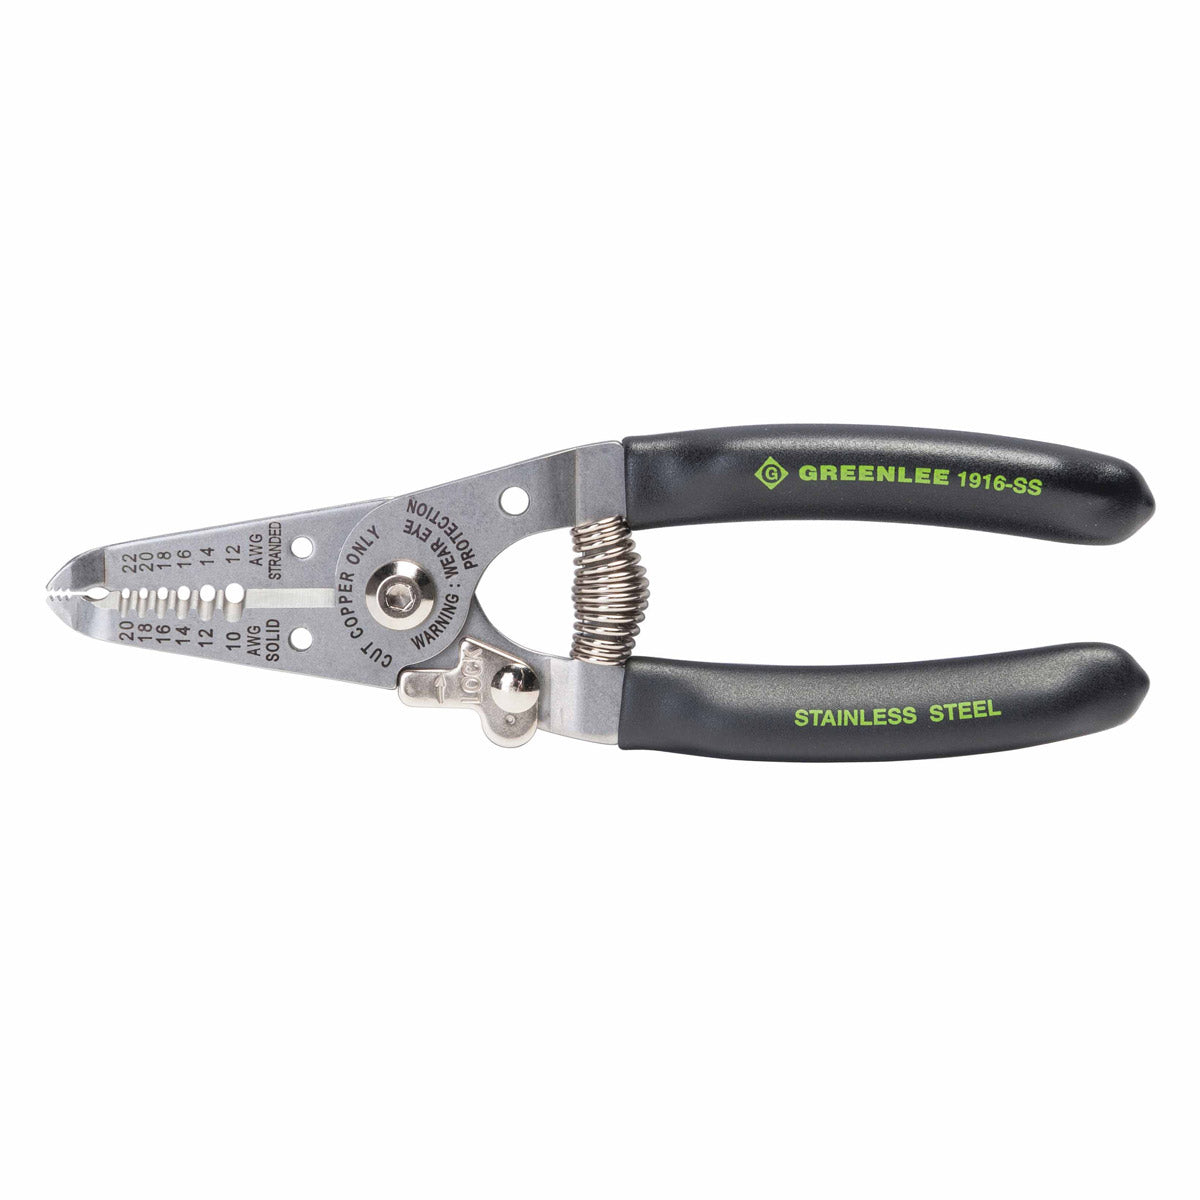 Greenlee 1916-SS Stainless Steel 6" Wire Stripper/Cutter 10-20 AWG